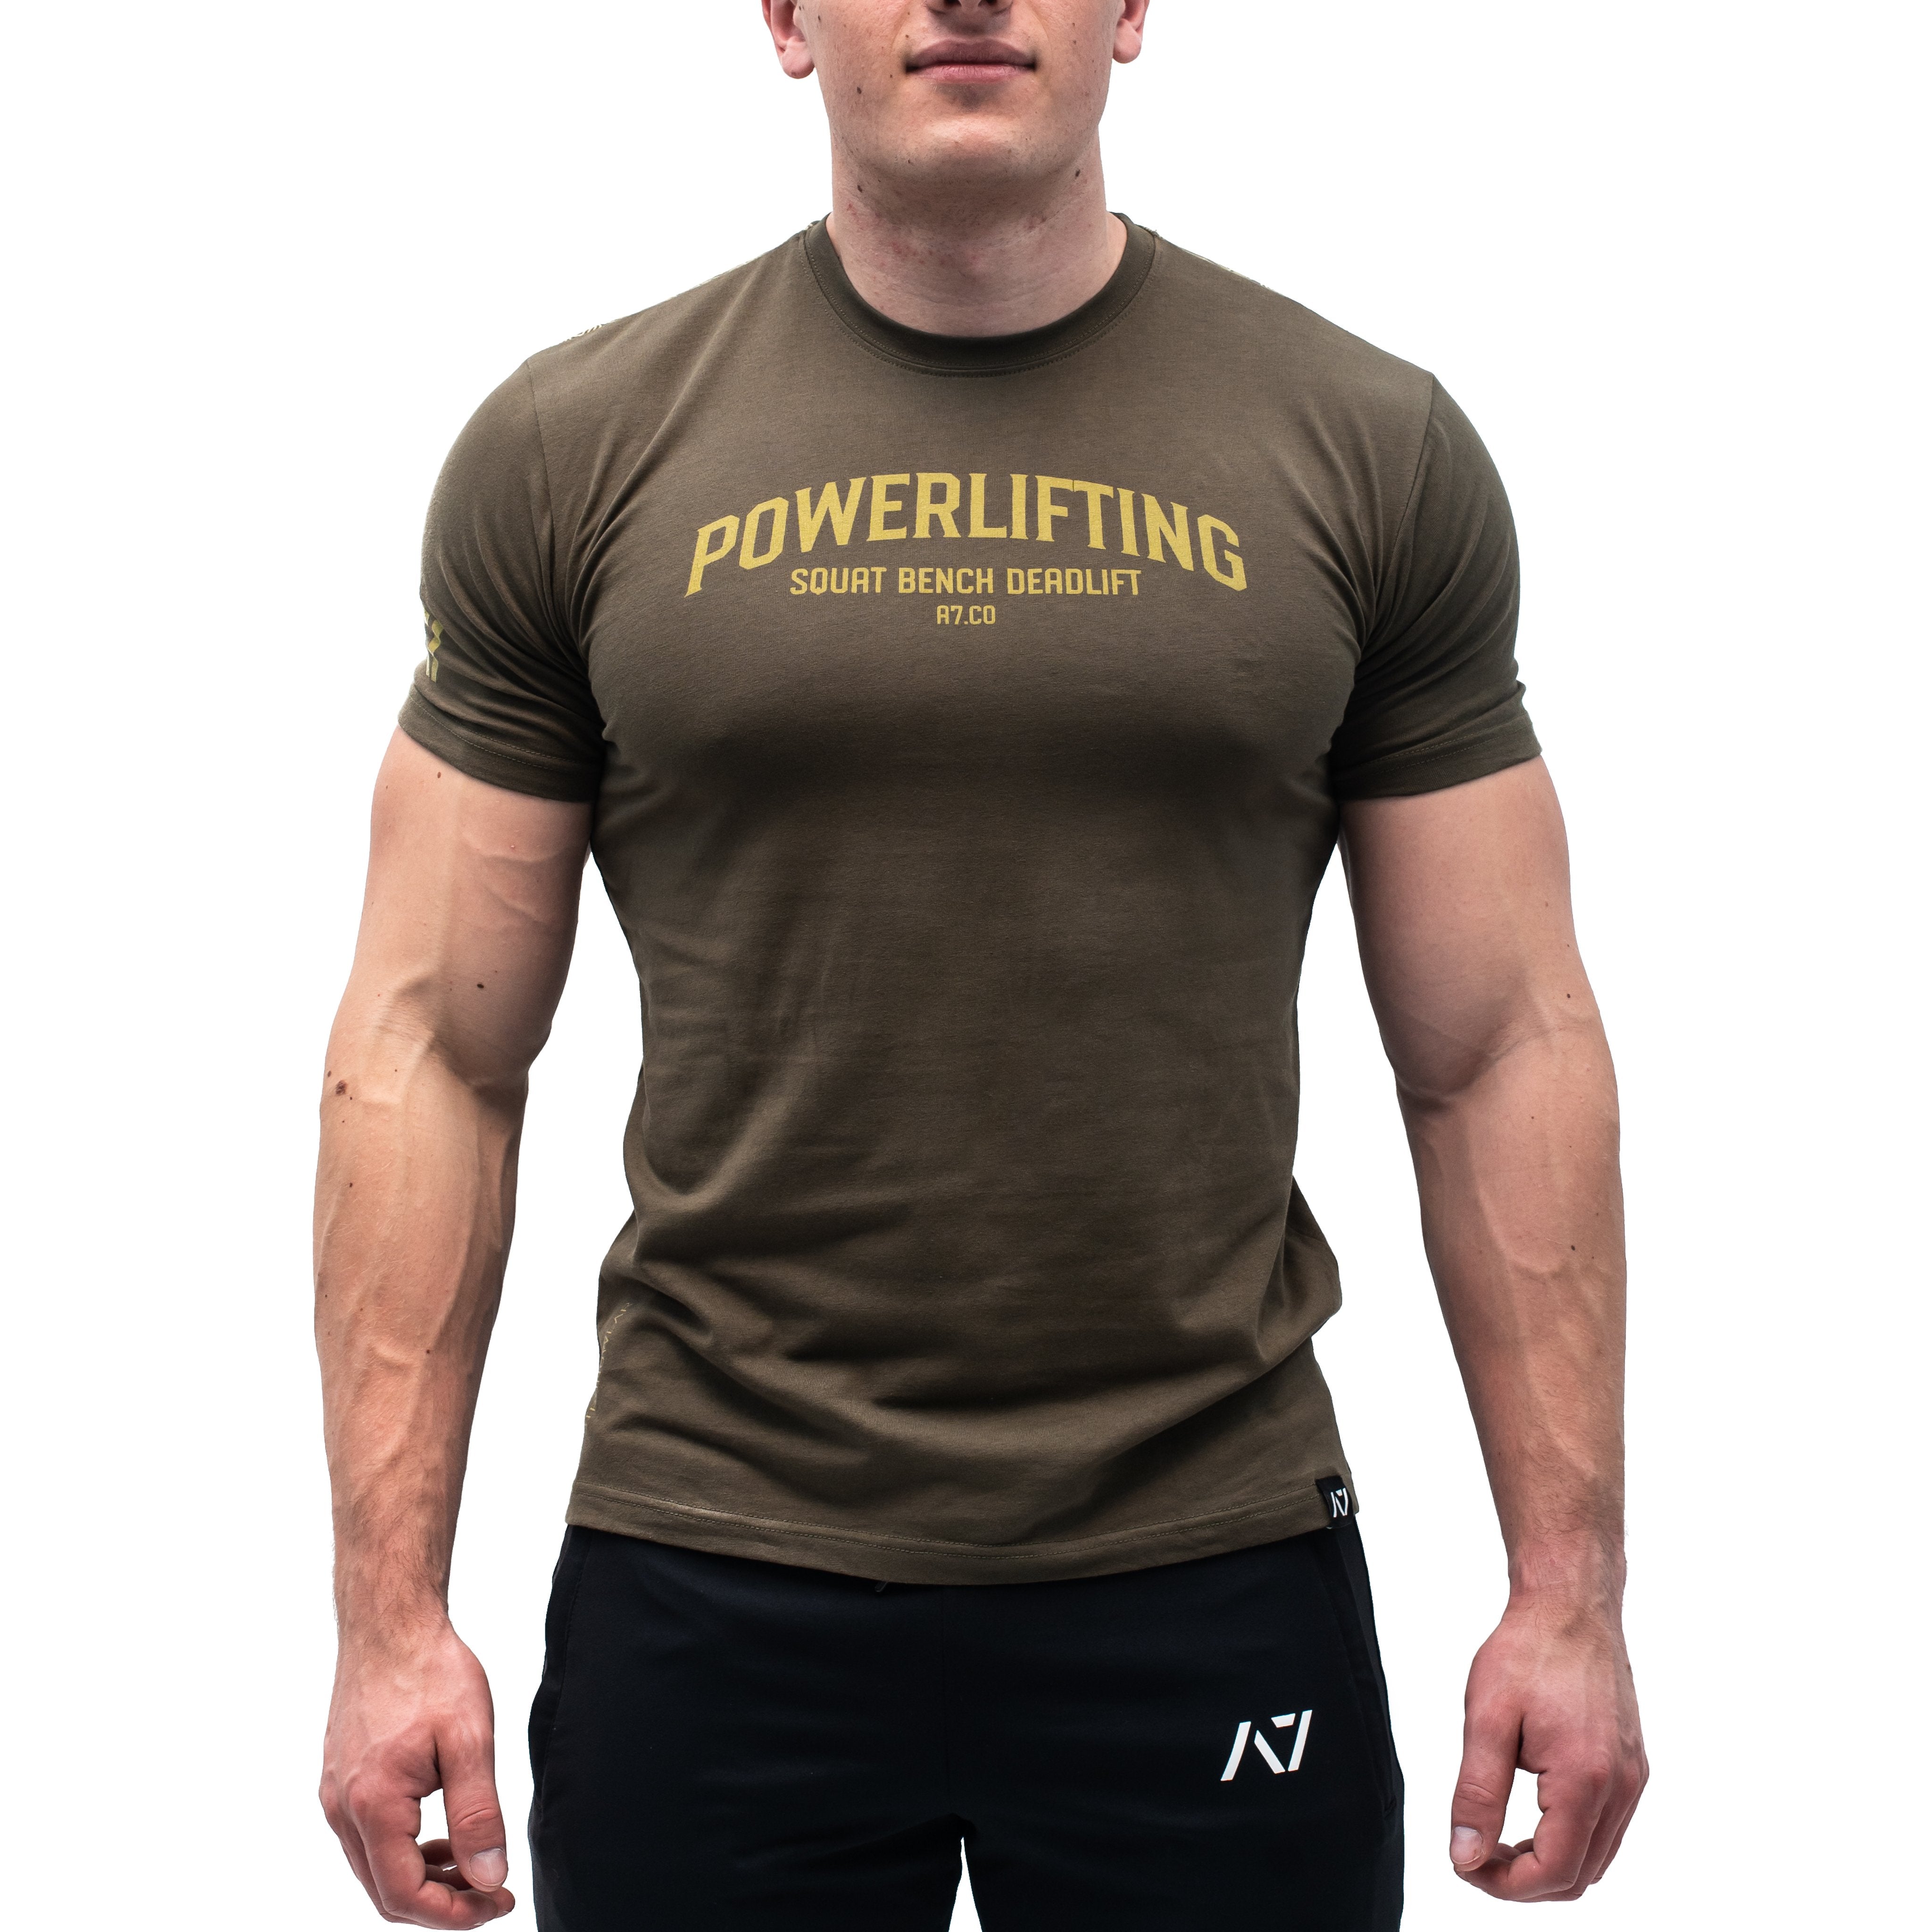 Powerlifting Military Bar Grip T-shirt, great as a squat shirt. Purchase Powerlifting Military Bar Grip tshirt UK from A7 UK or A7 Europe. No more chalk and no more sliding. Best Bar Grip Tshirts, shipping to UK and Europe from A7 UK or A7 Europe. The best Powerlifting apparel for all your workouts. Available in UK and Europe including France, Italy, Germany, Sweden and Poland